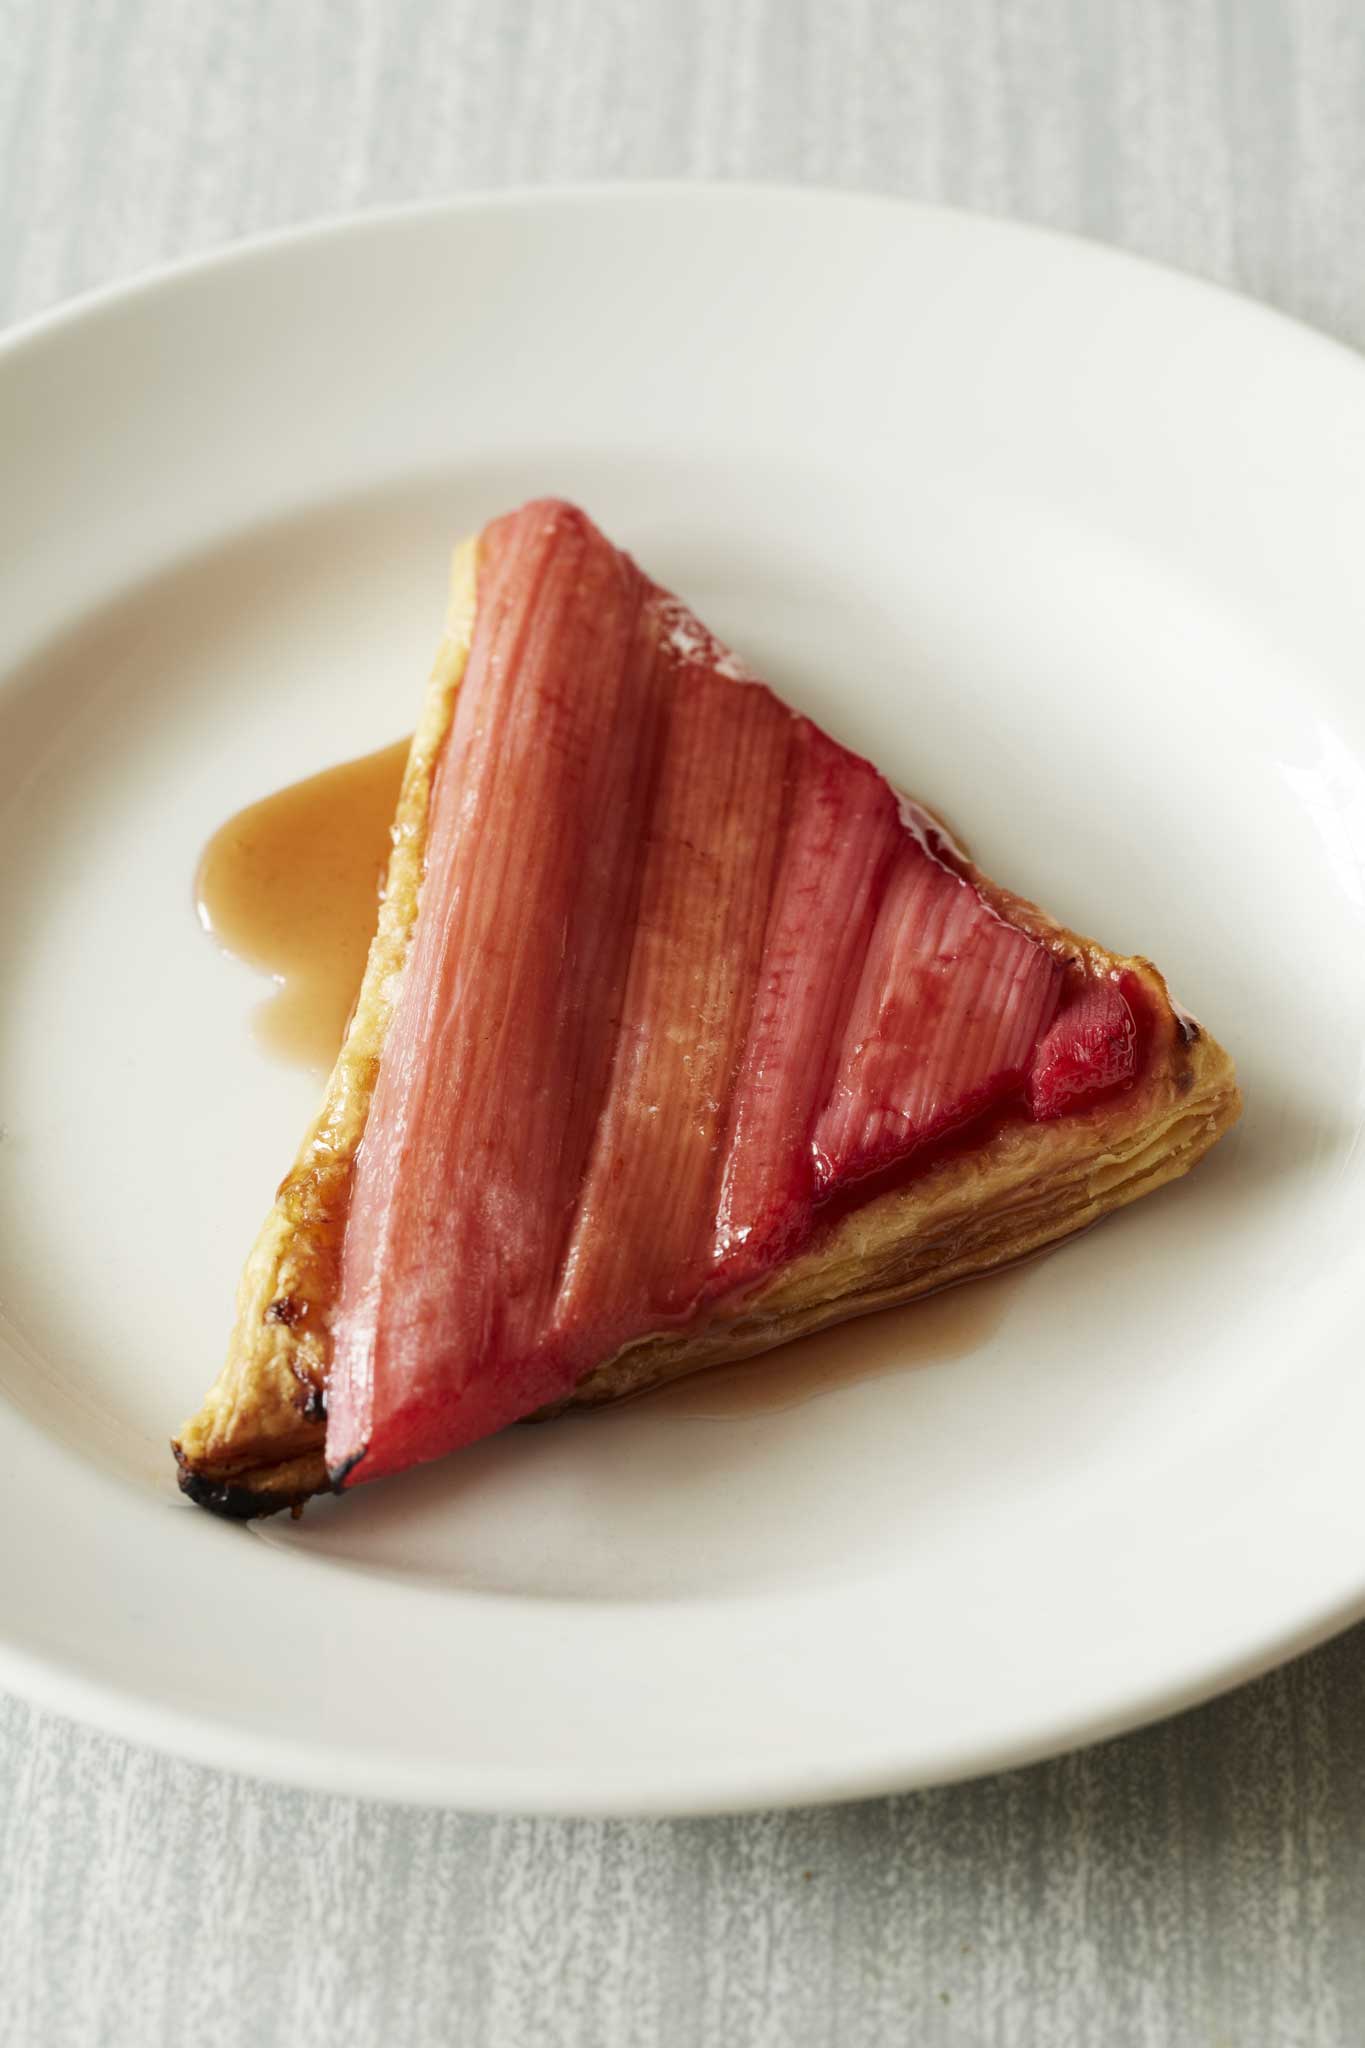 Serve Mark's rhubarb triangle with ice-cream, clotted cream or whipped cream flavoured with vanilla, ginger or even a dash of Kingston Black cider brandy